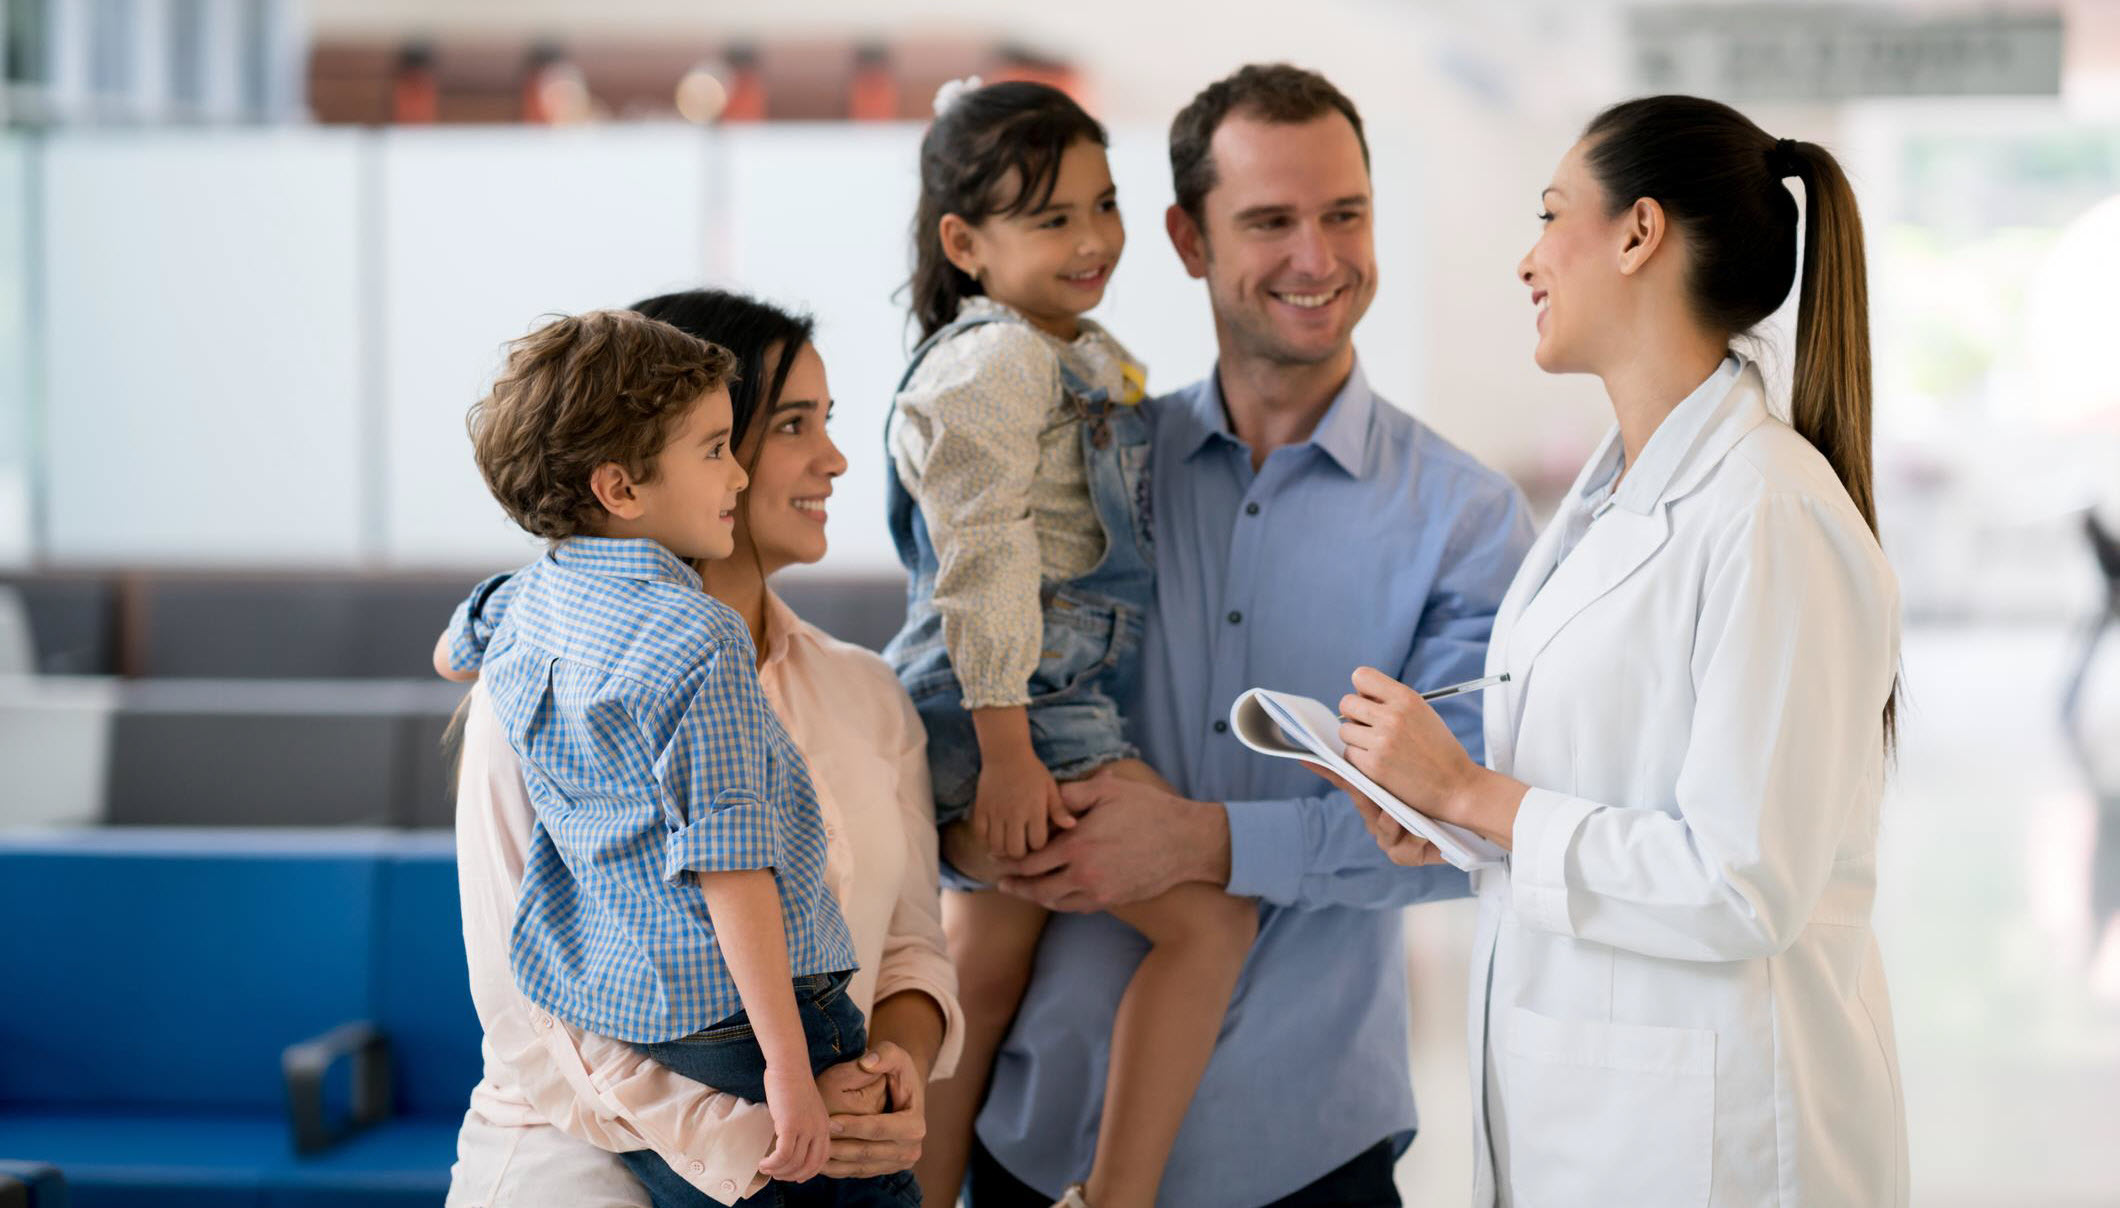 A happy family consisting of a mother, father, and two children is engaging with a female healthcare professional, possibly during a family therapy session. The family is smiling and appears relaxed and comfortable in a clinical setting.